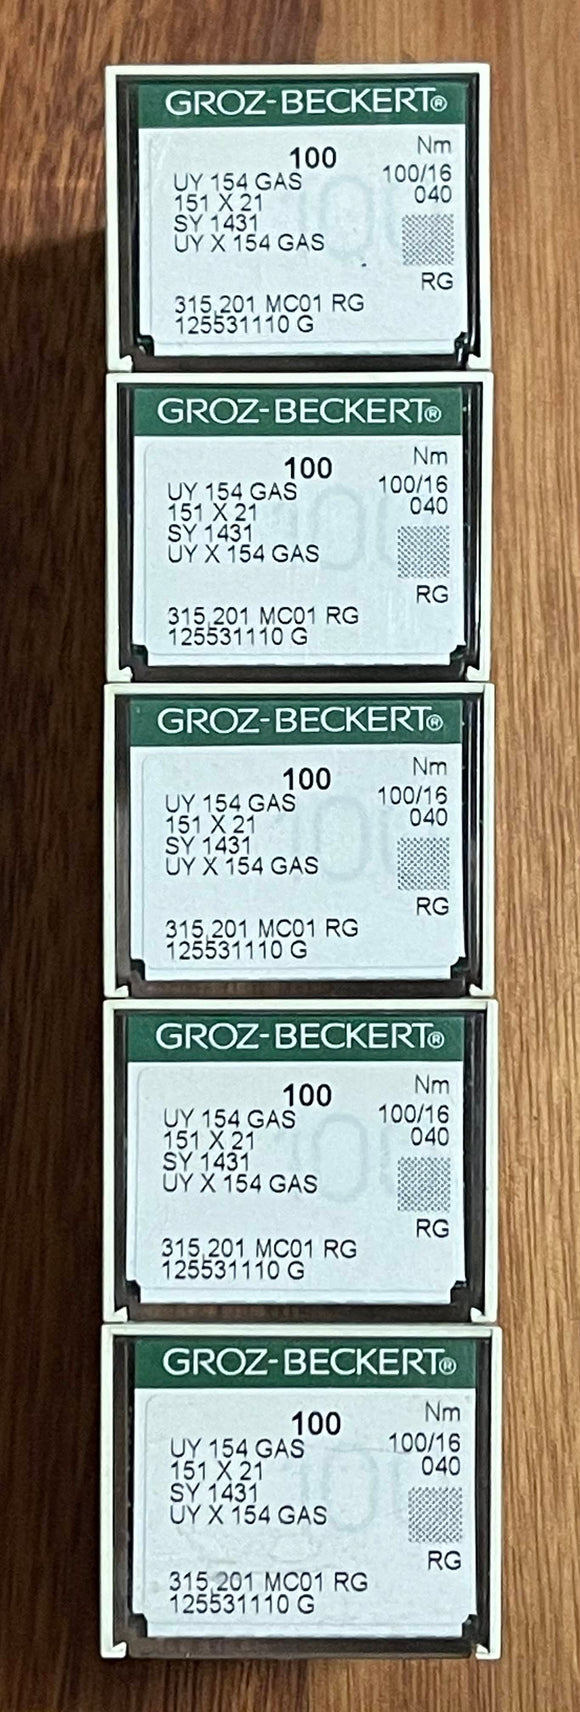 GB0660EB/100 x 500pcs  |  *|* 500 Needles Groz Beckert Ballpoint Needle SY1433, UY154FGS, UY154GAS, UOX154-SES/FFG-size # 100/16 To suit Union Special 39500 series